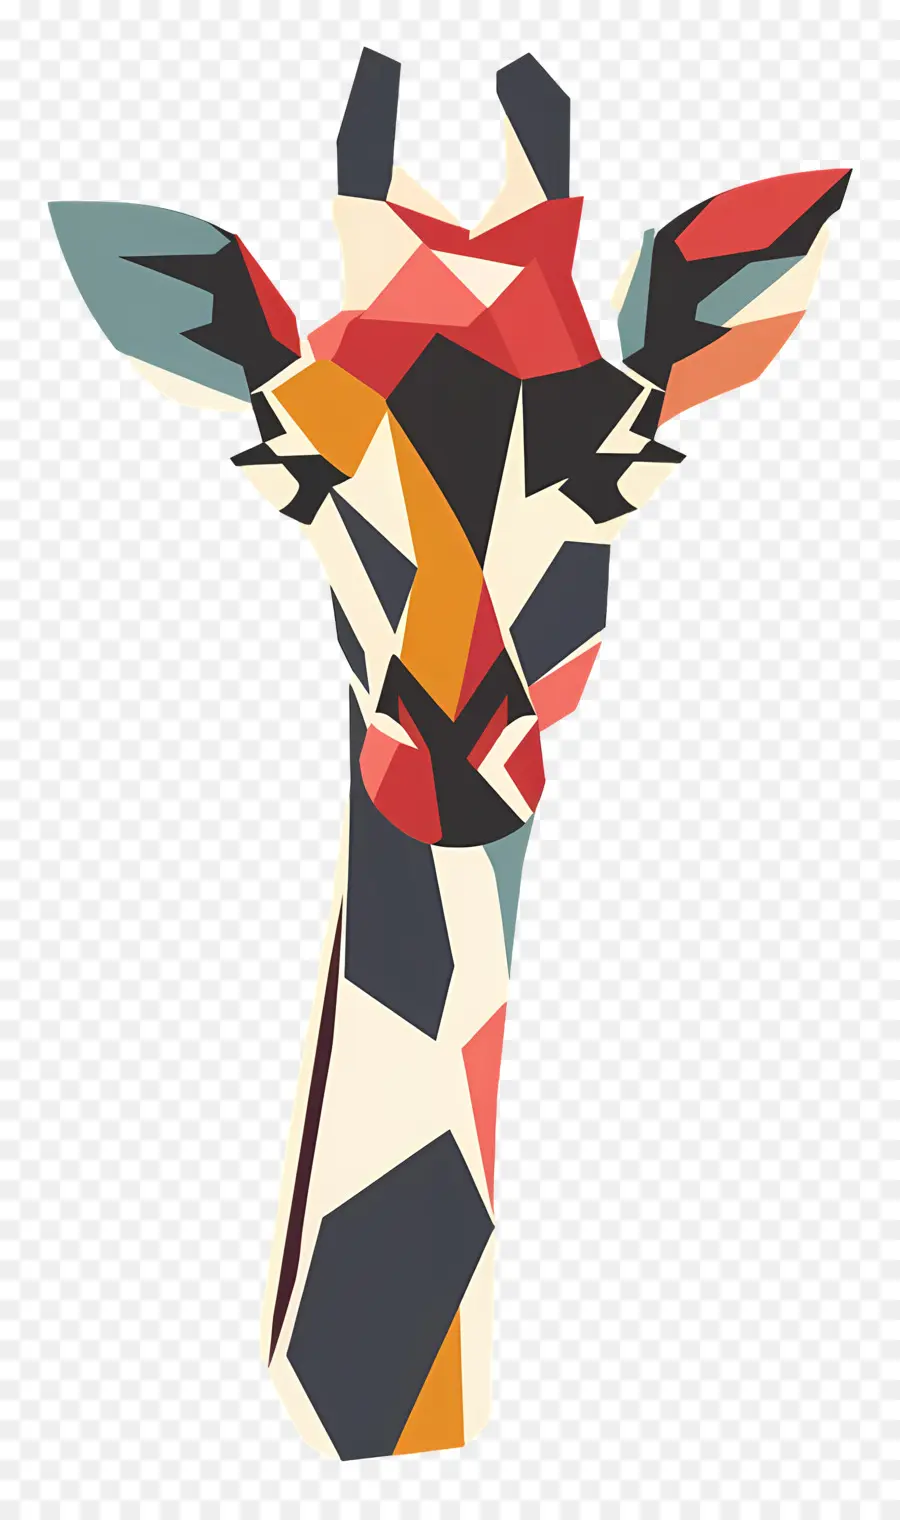 Girafe，Les Triangles PNG